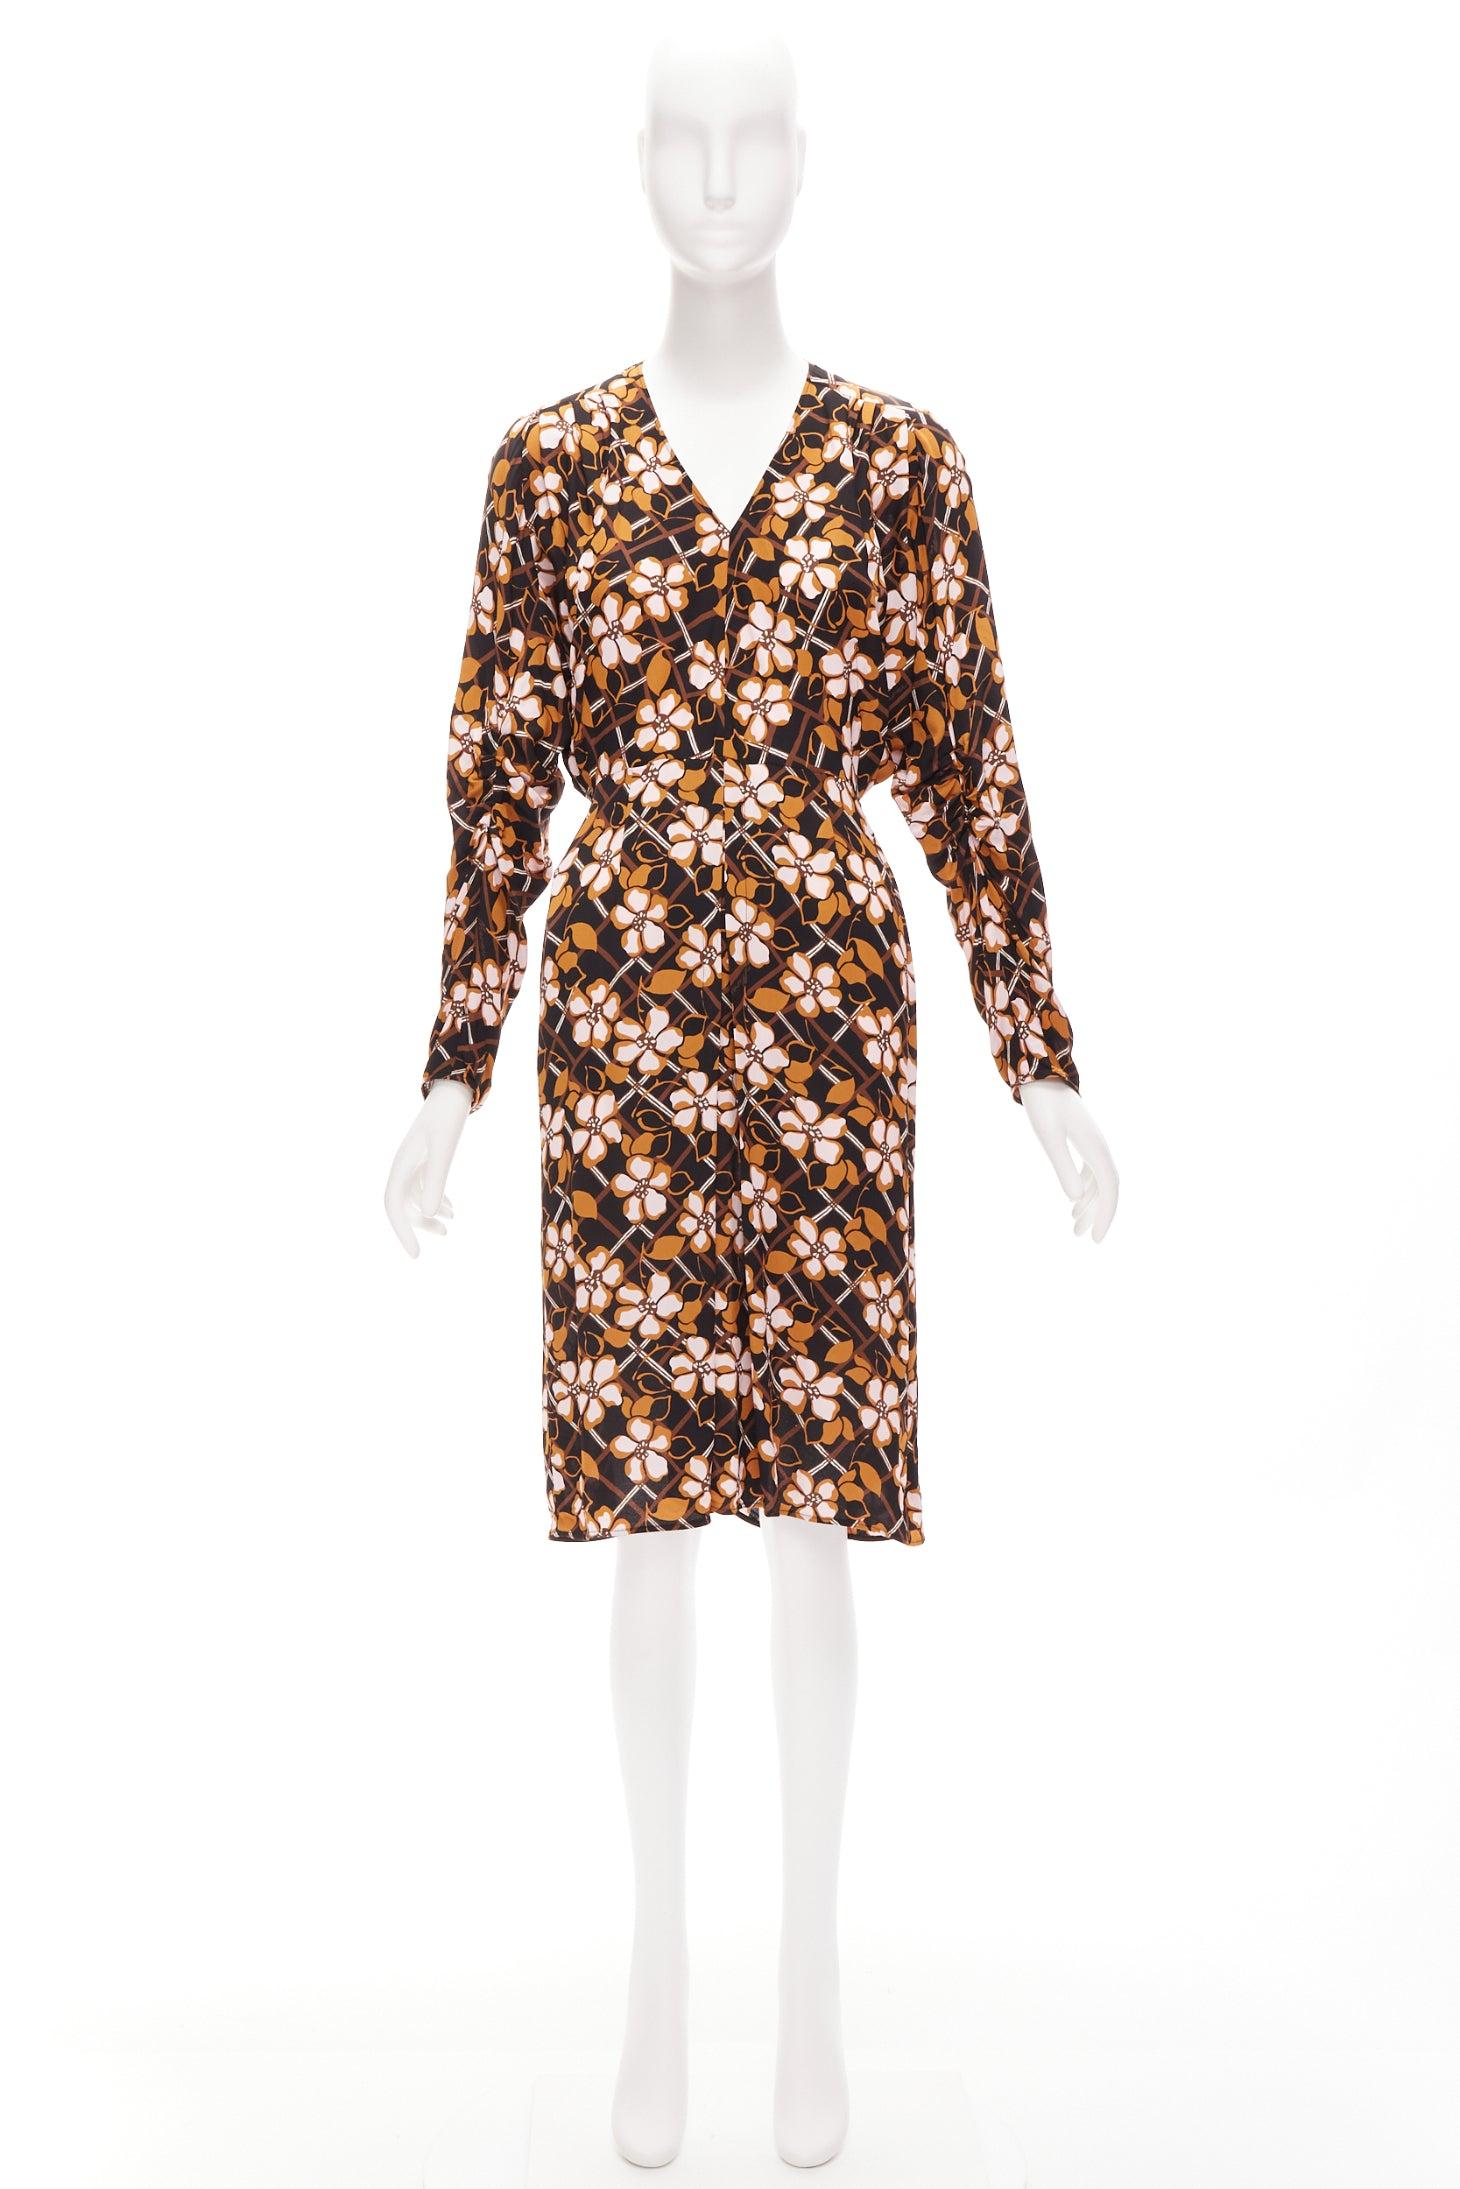 MARNI pink brown geometric flower print panelled sleeves V neck dress IT38 XS For Sale 3